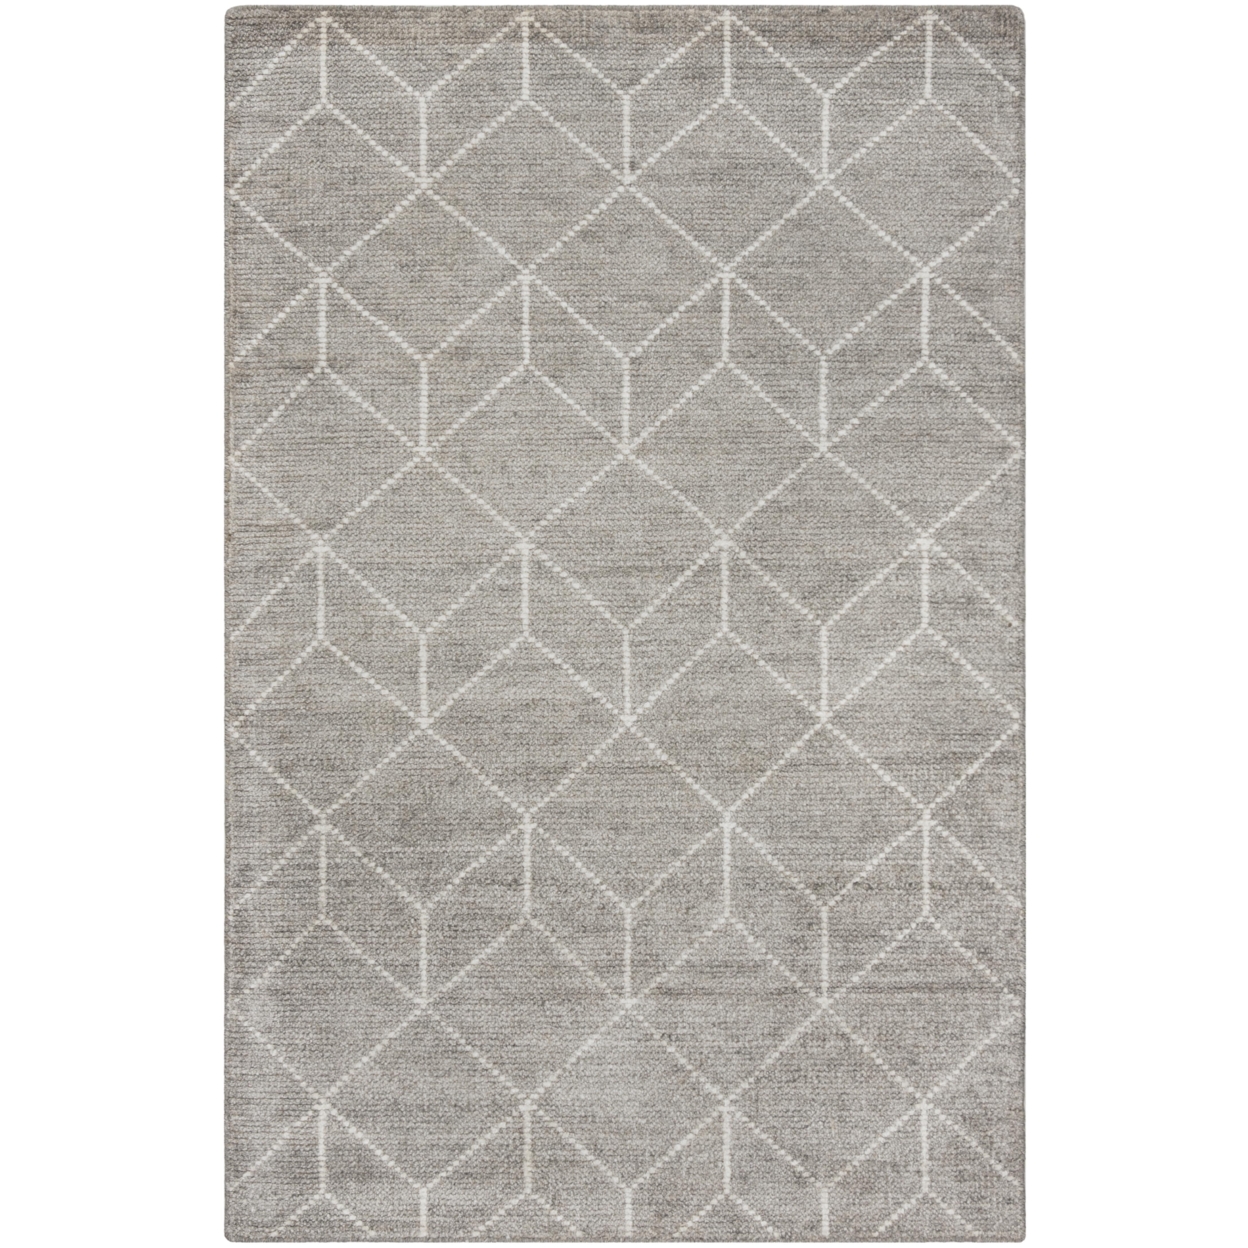 SAFAVIEH Stone Wash STW904A Hand-knotted Silver Rug - 5' X 8'